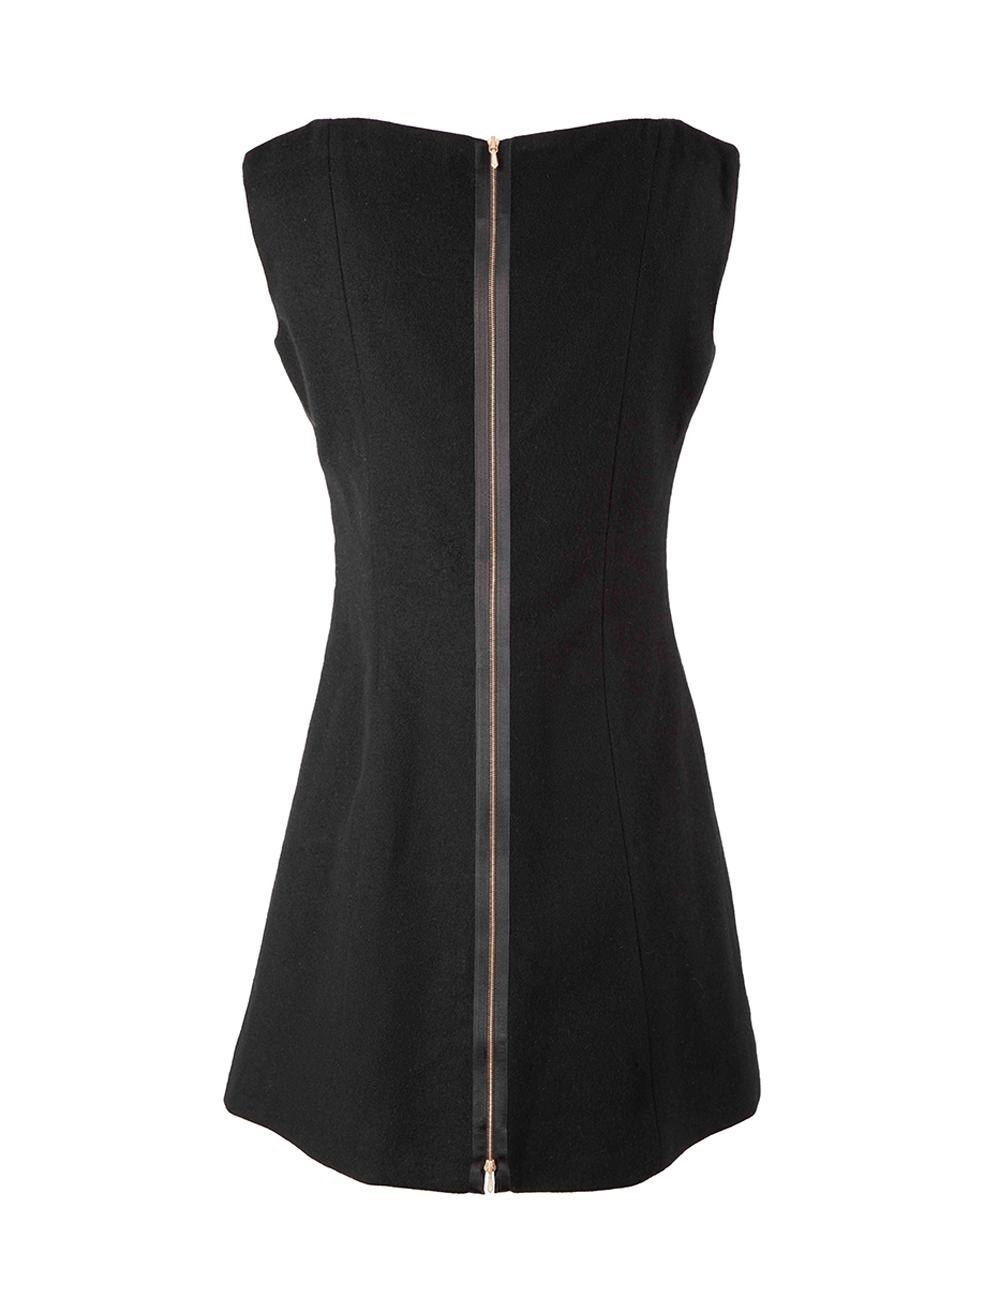 Black Wool Metal Ring Detail Mini Dress Size M In Good Condition For Sale In London, GB